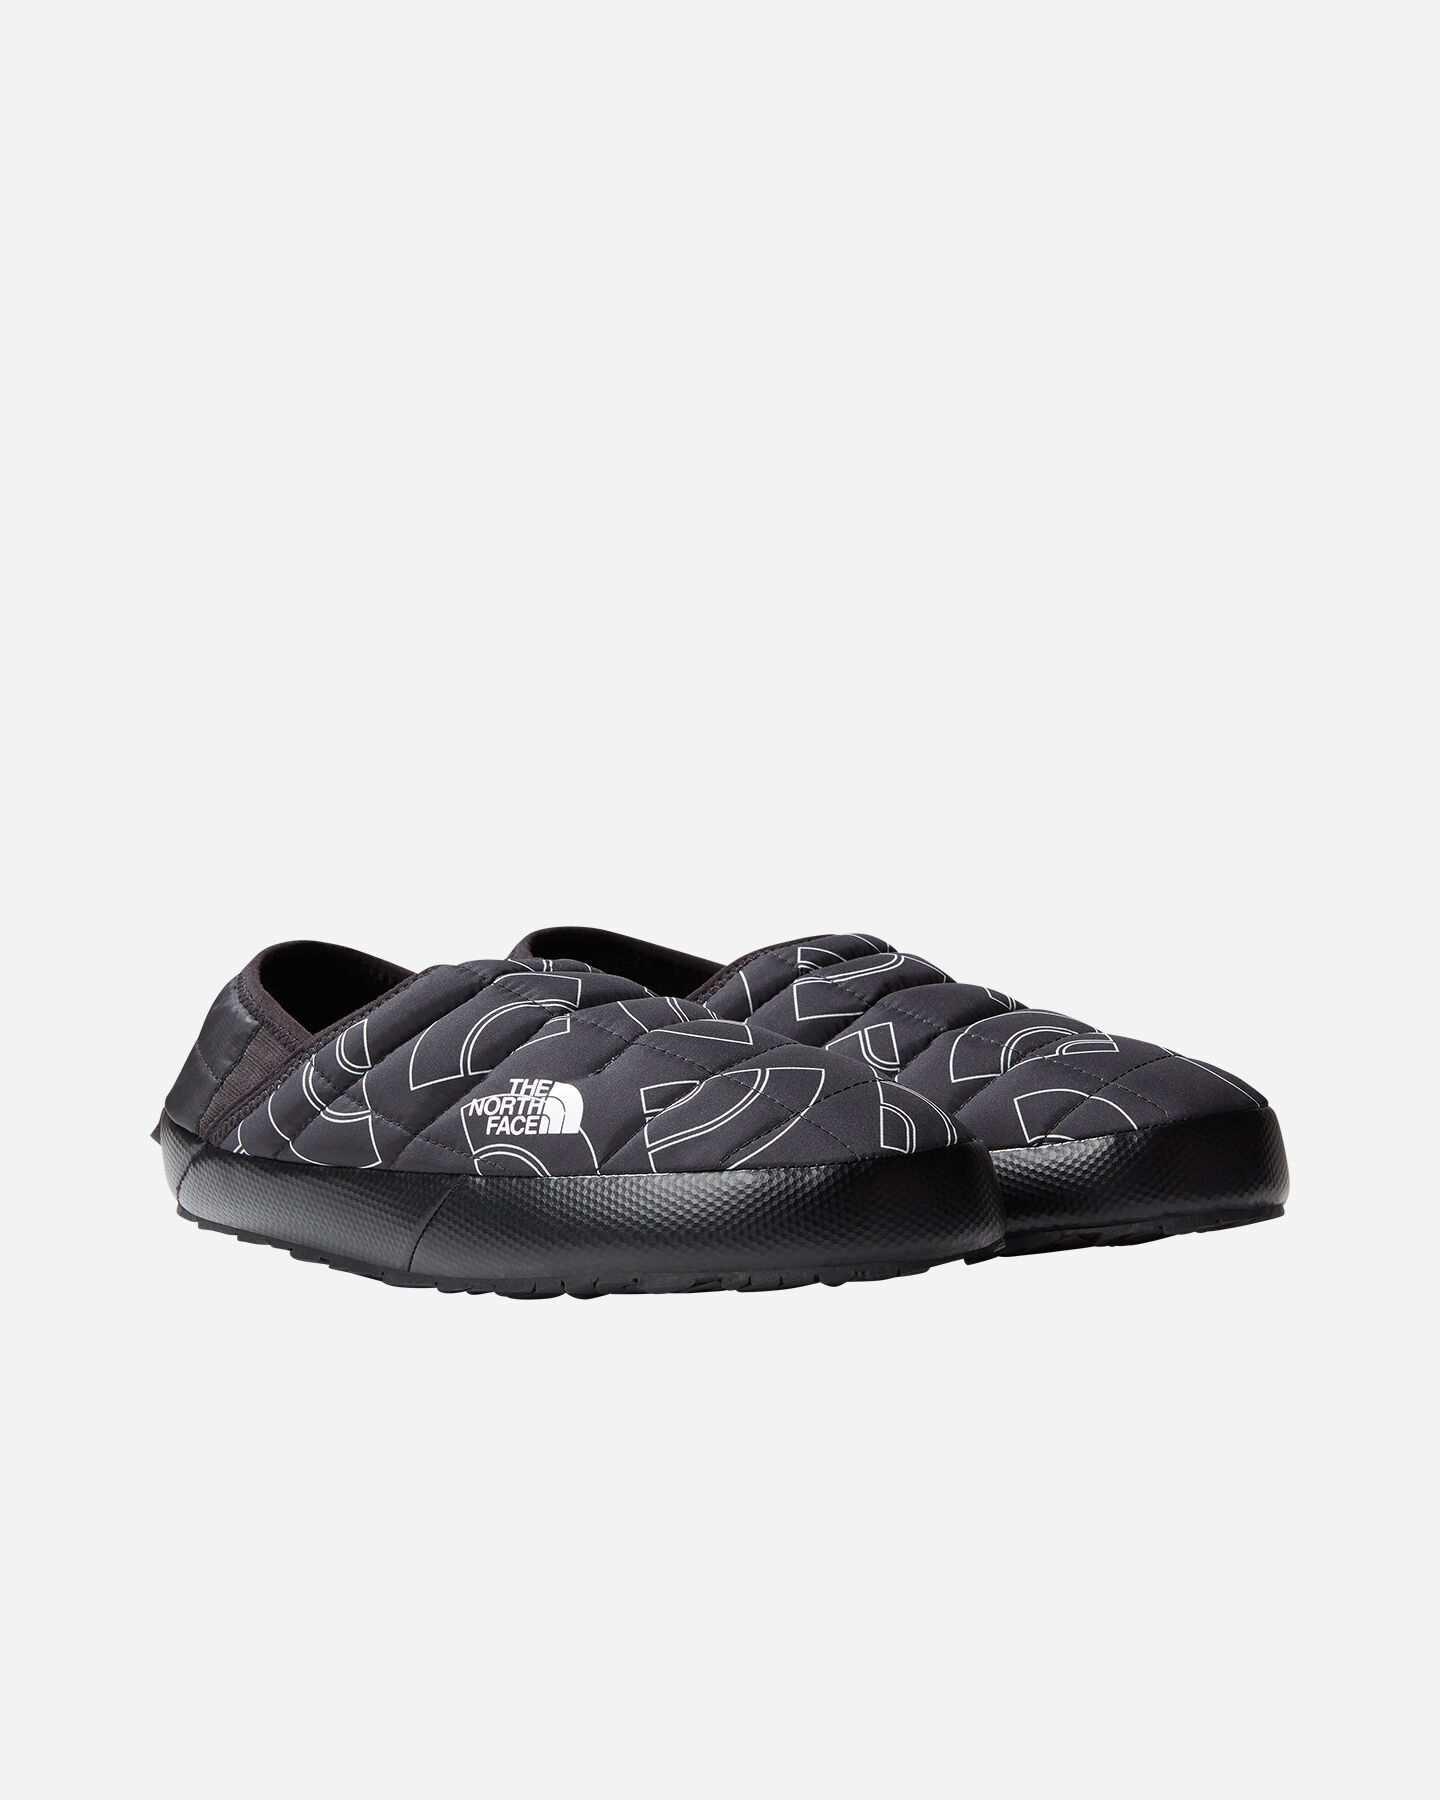  Ciabatte THE NORTH FACE THERMOBALL TRACTION MULE V M S5597595|OJS|7 scatto 2